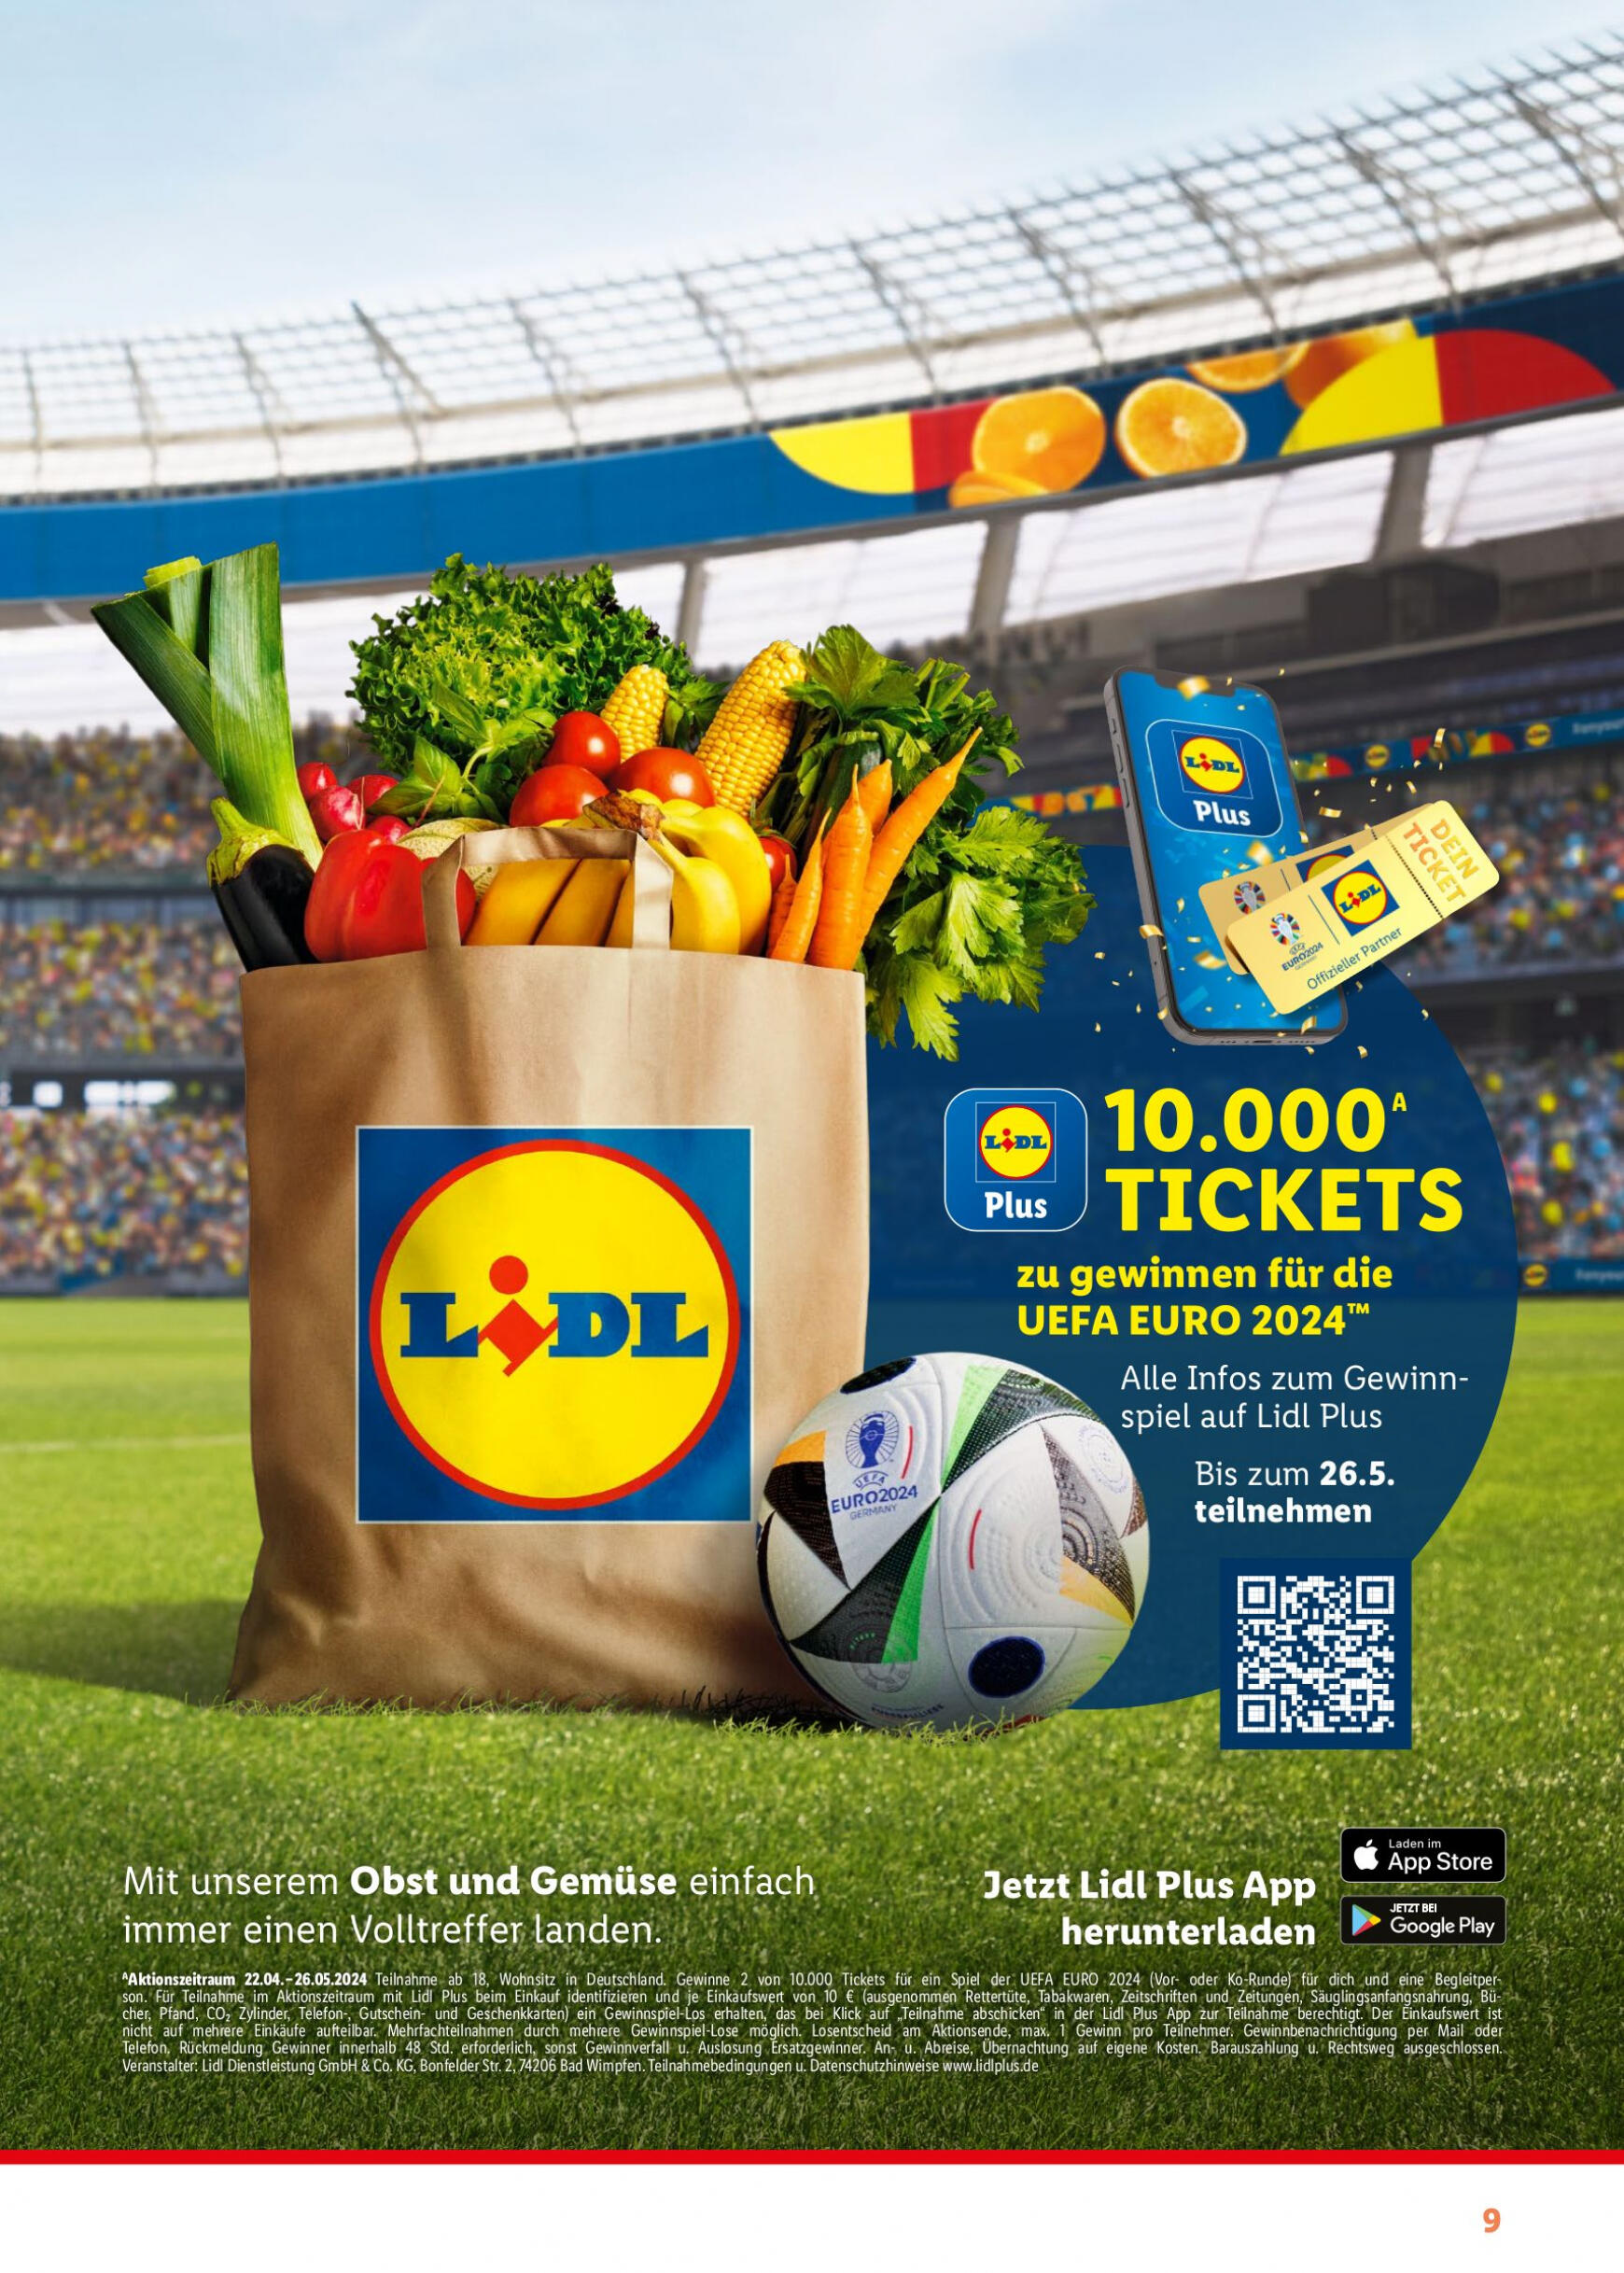 lidl - Flyer Lidl - aktuell 13.05. - 16.06. - page: 9